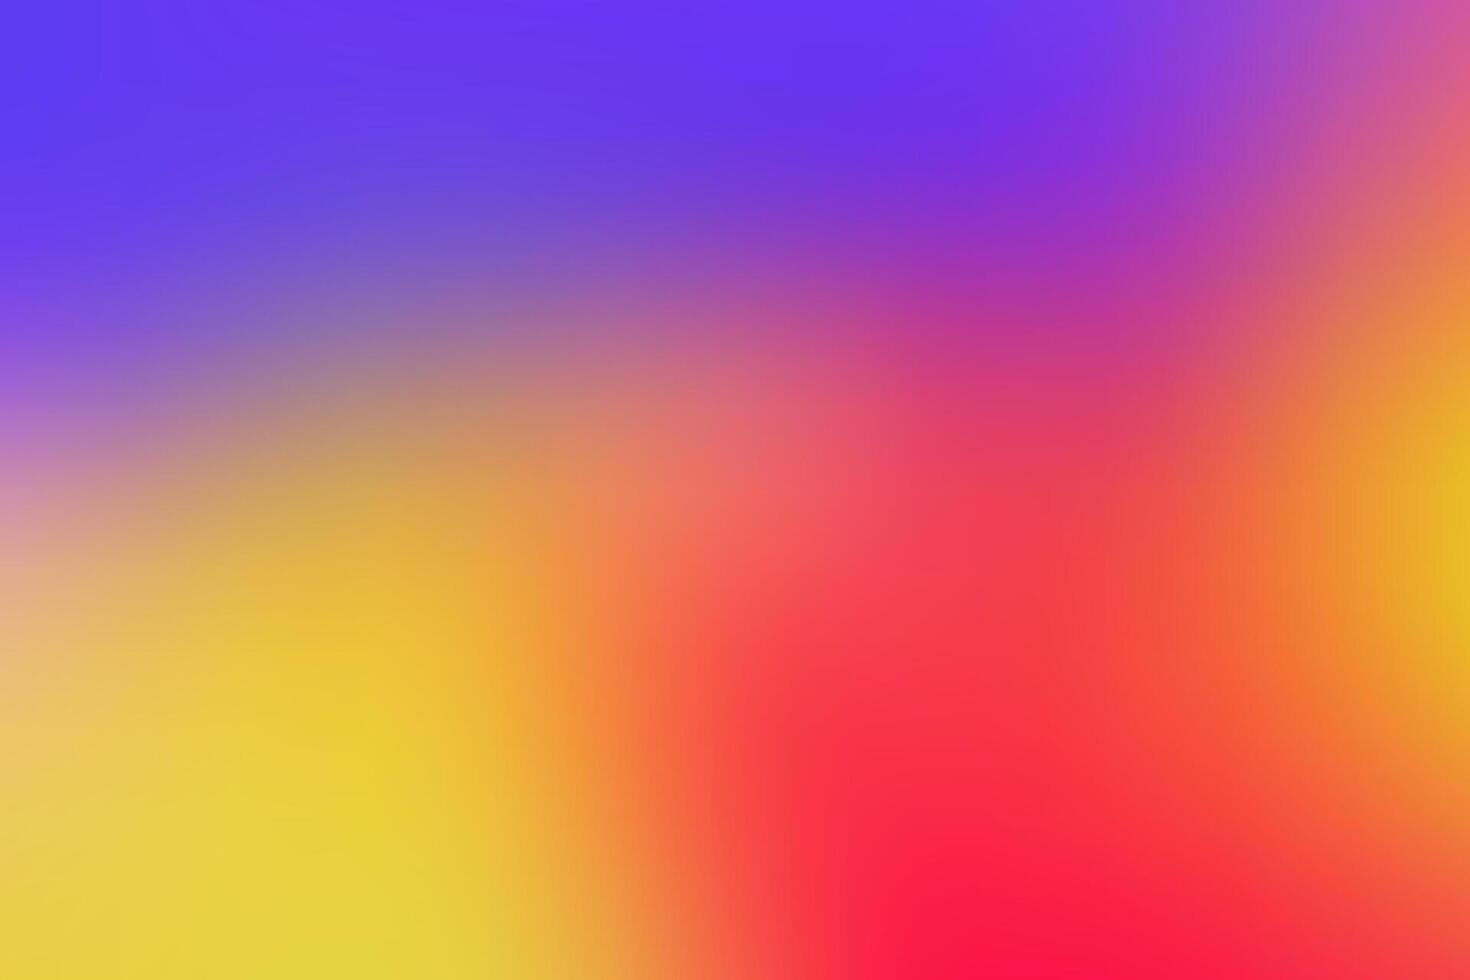 Aesthetic Trendy Gradient Background for Creative Projects vector